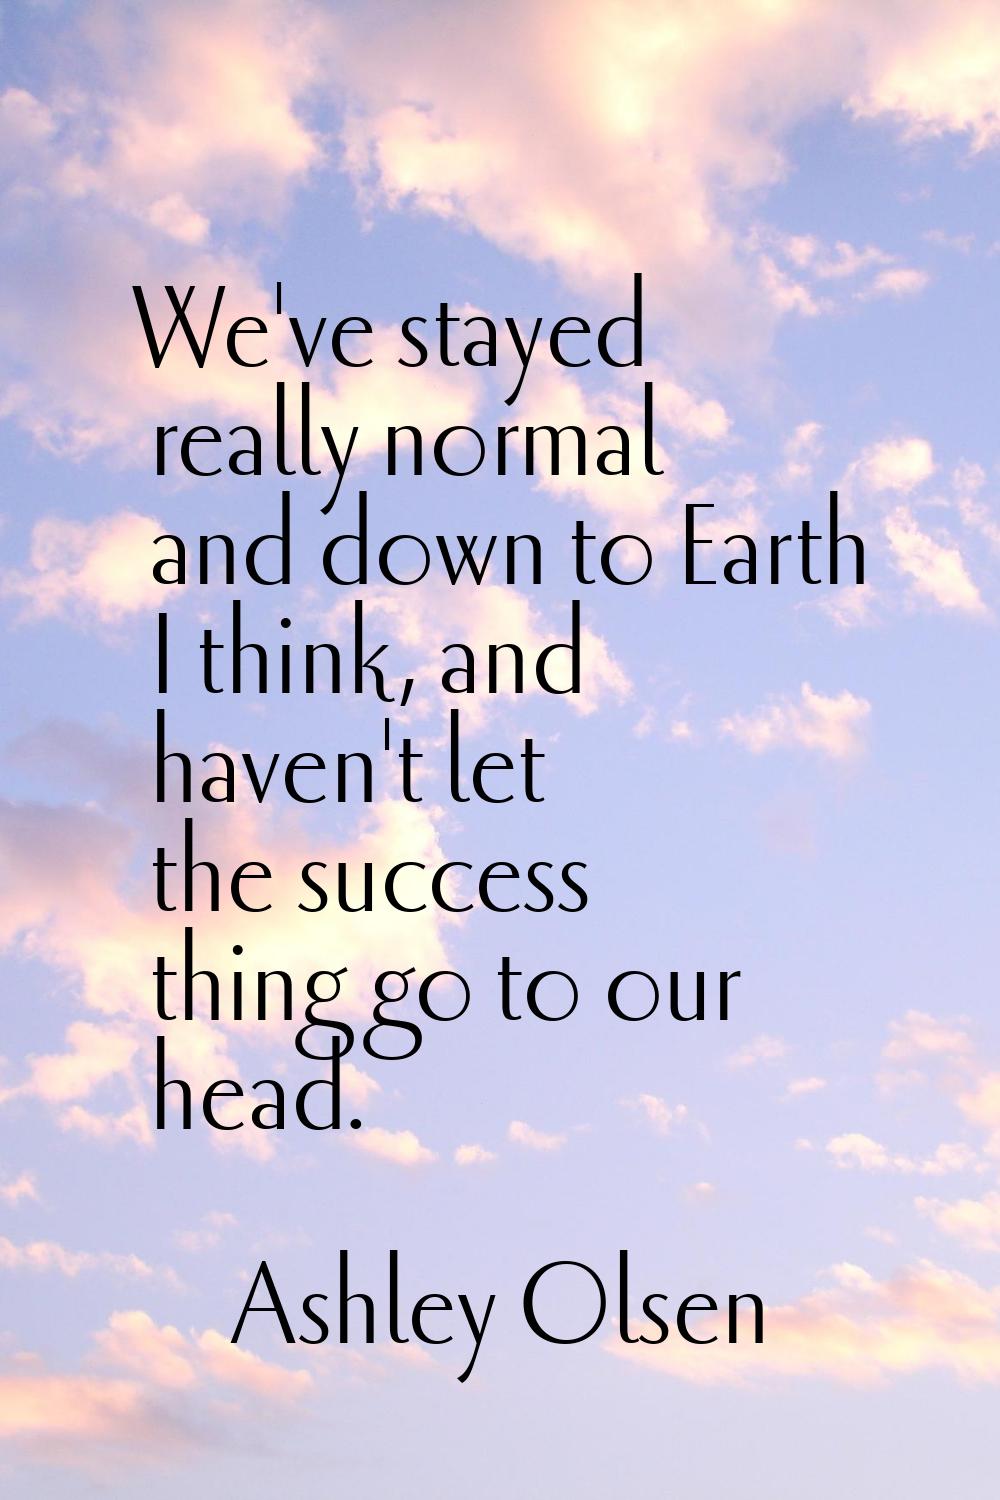 We've stayed really normal and down to Earth I think, and haven't let the success thing go to our h